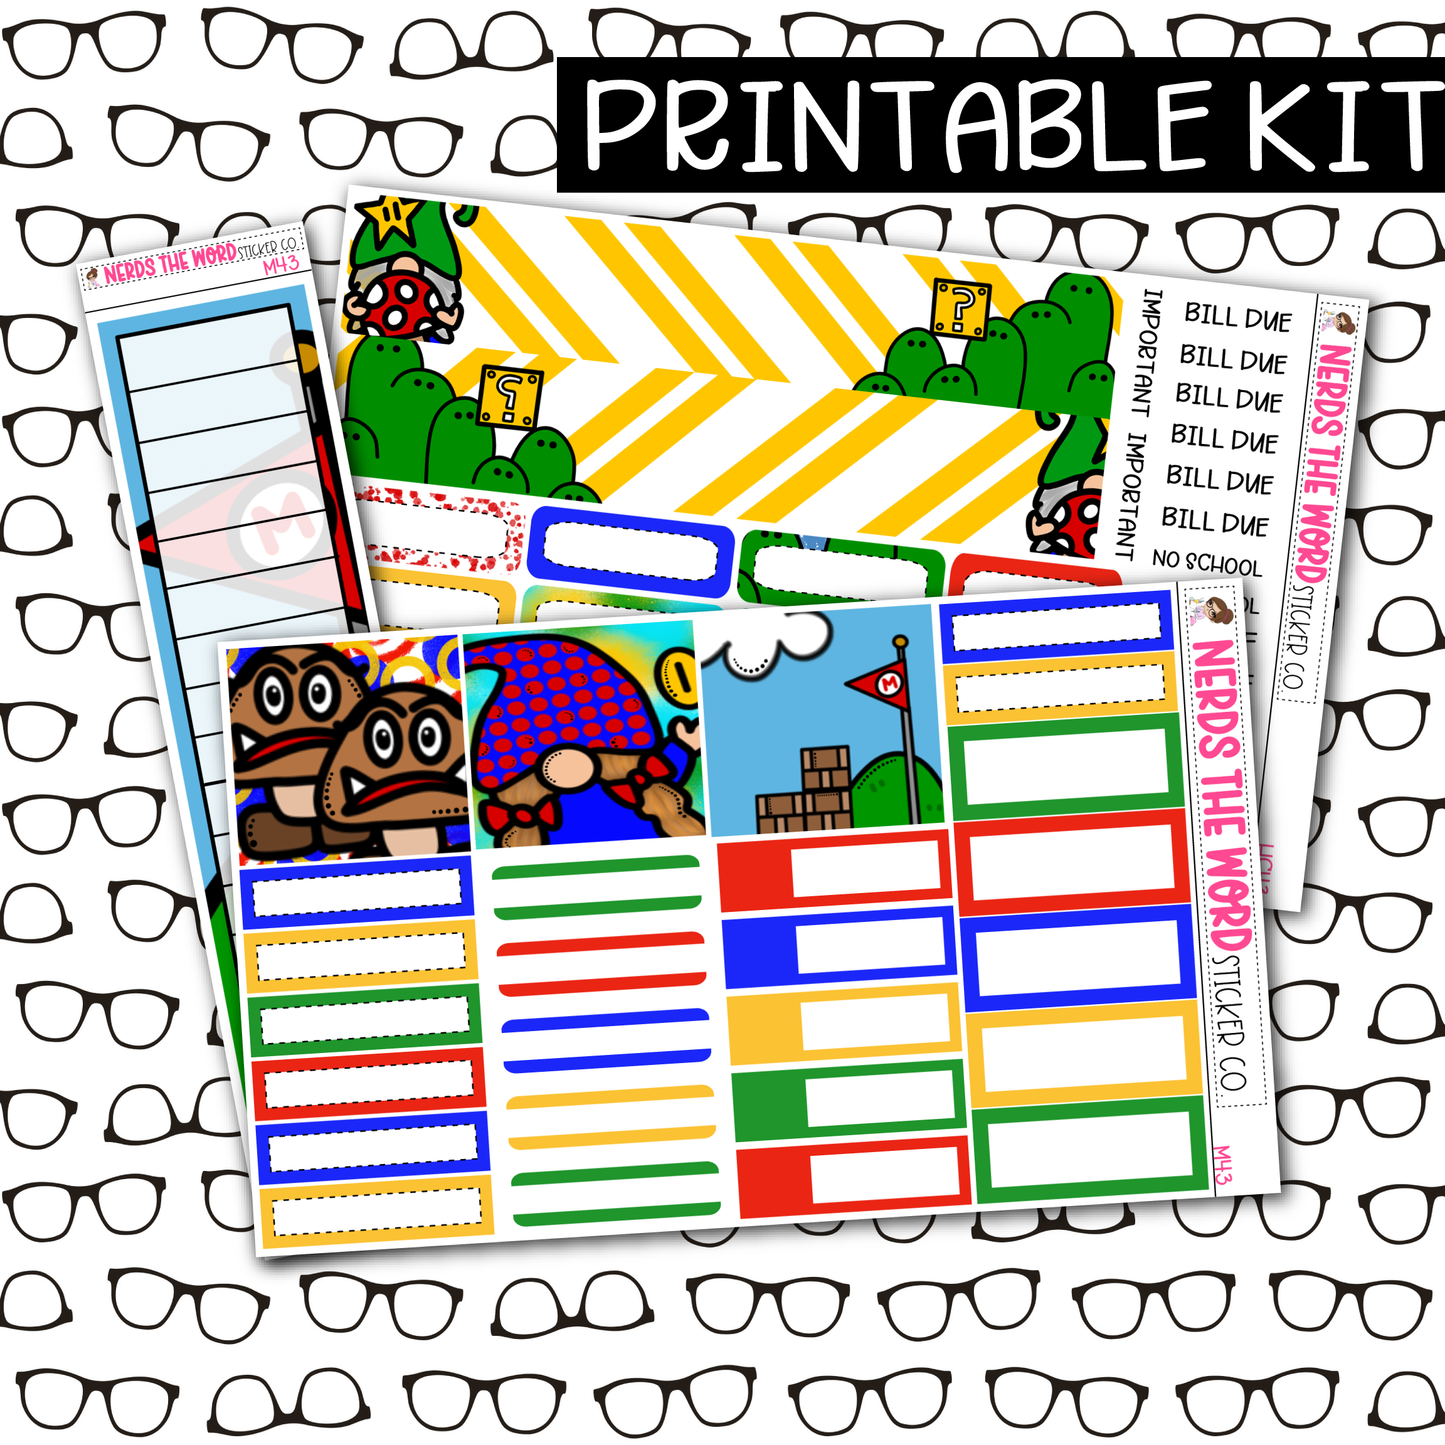 PRINTABLE Plumber Bros Monthly Kit - Choose your Size